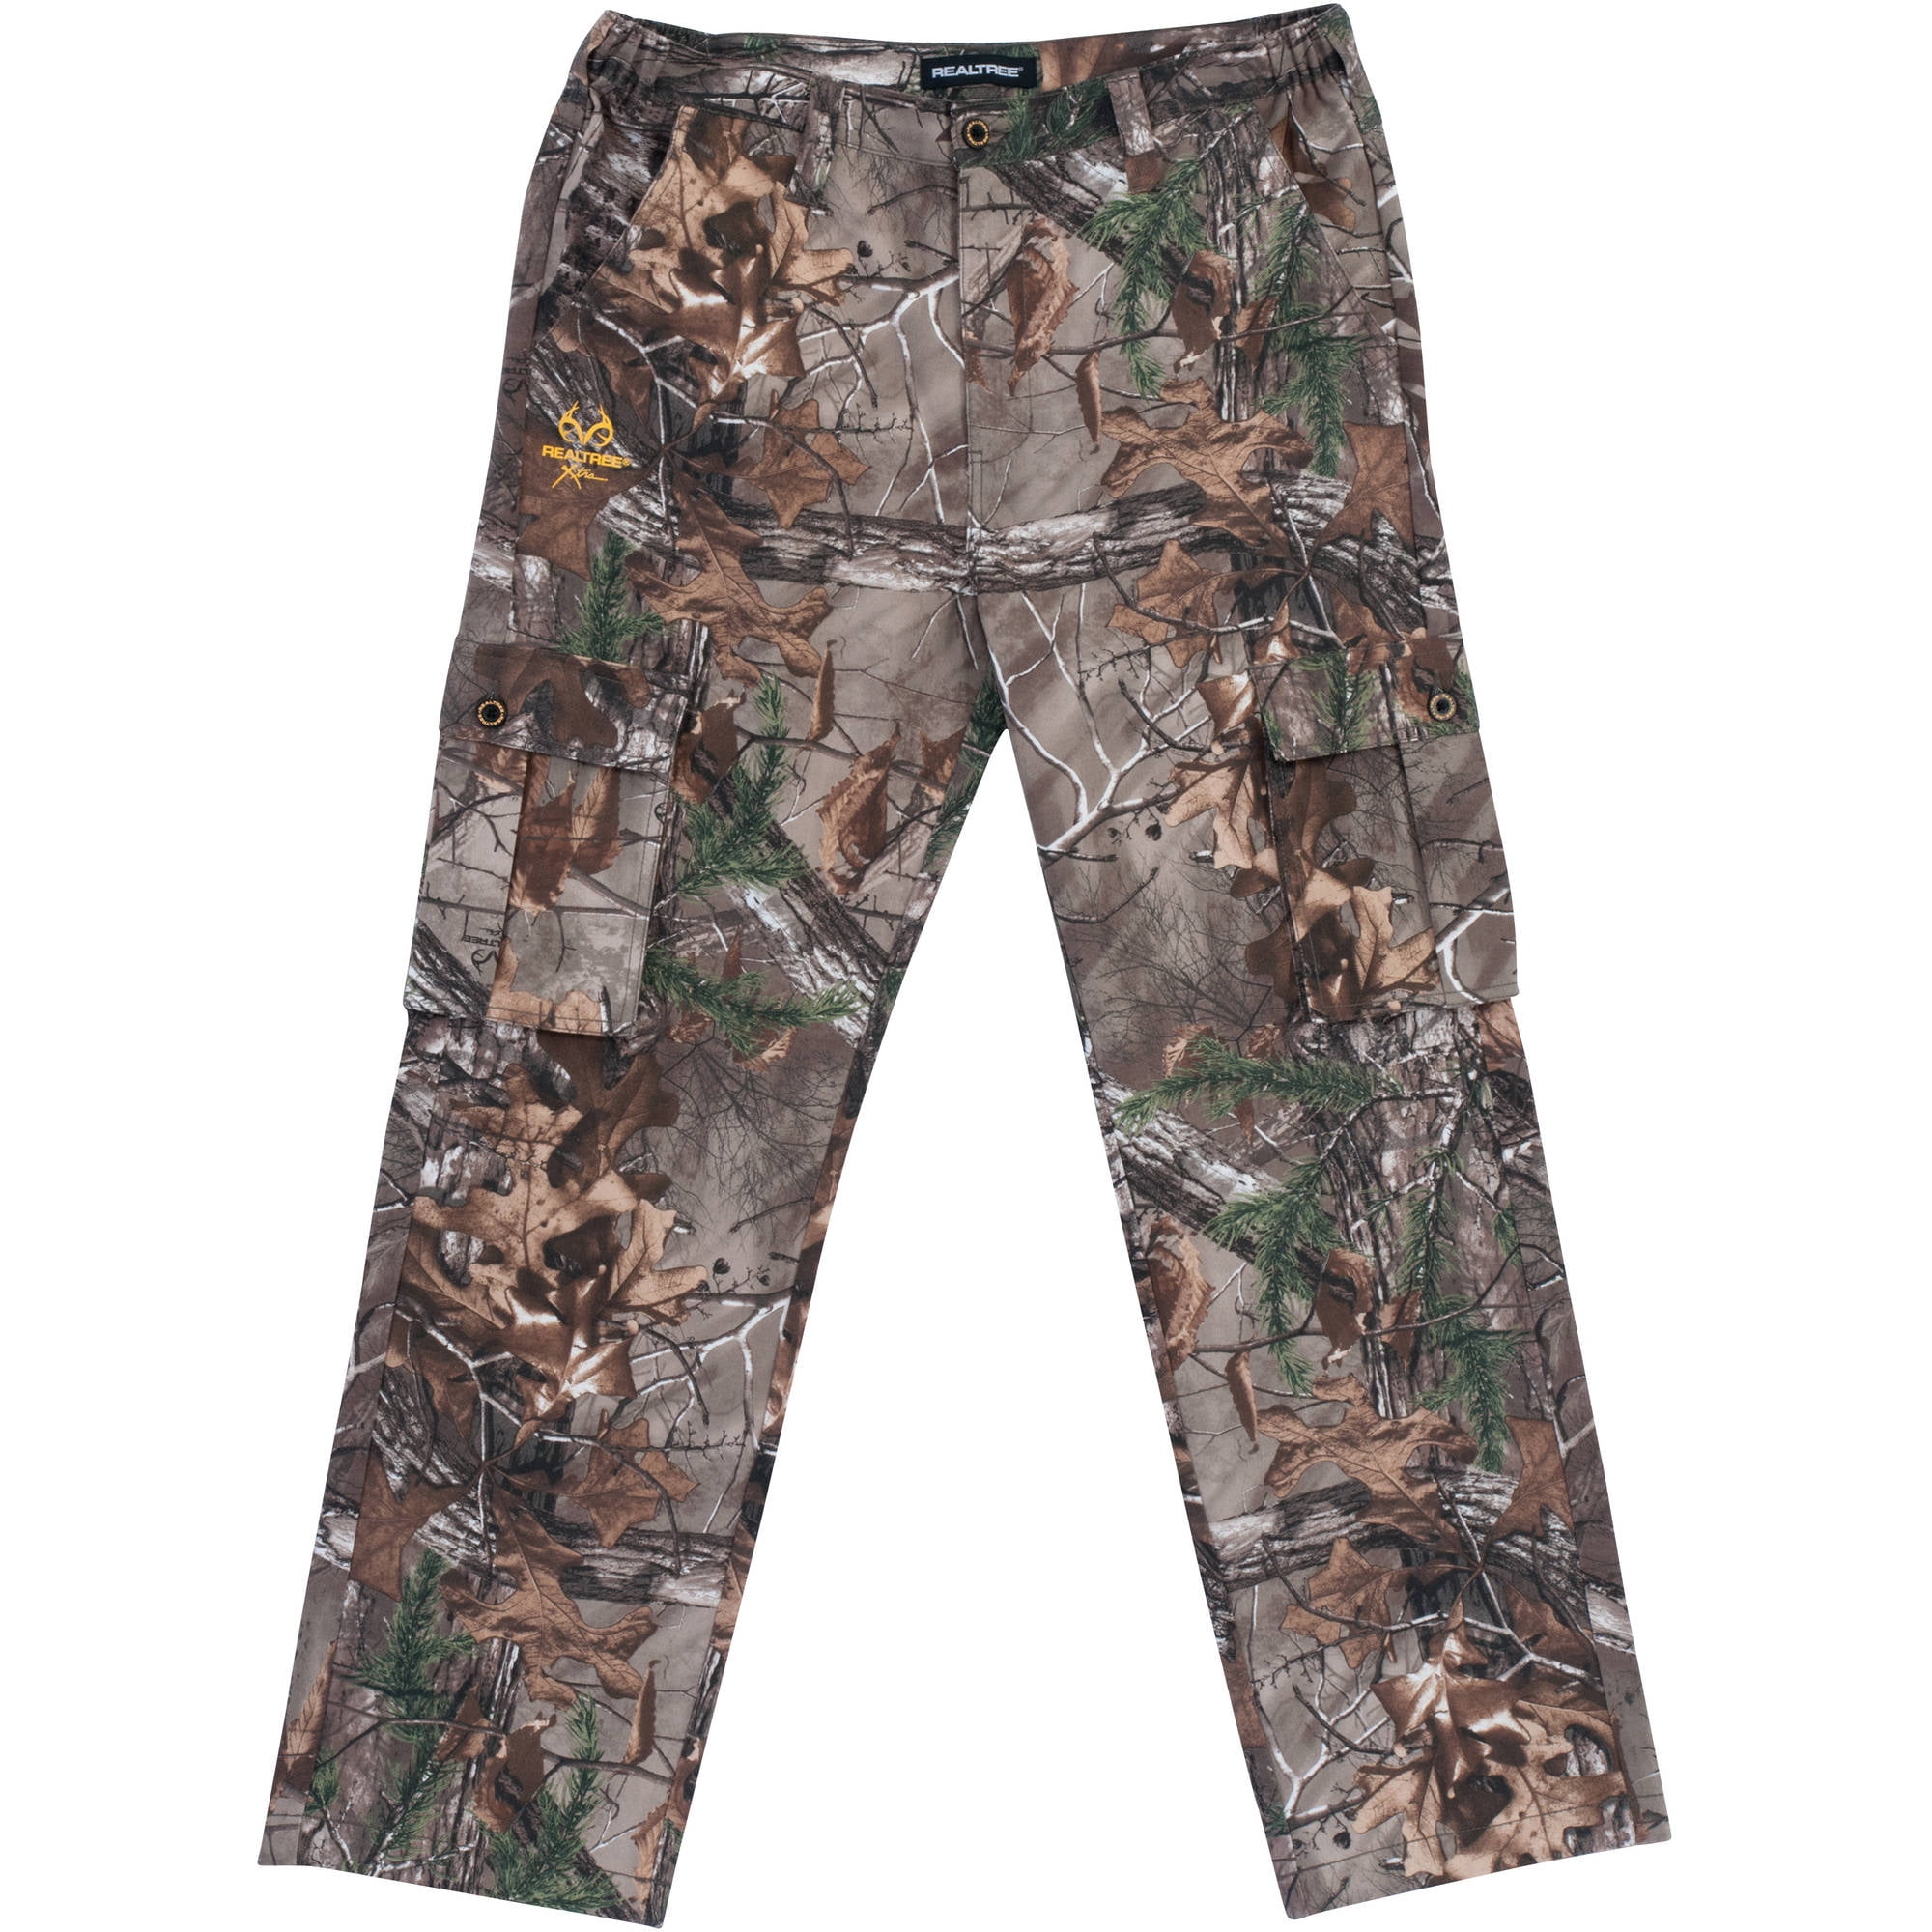 Where to buy redhead hunting clothes